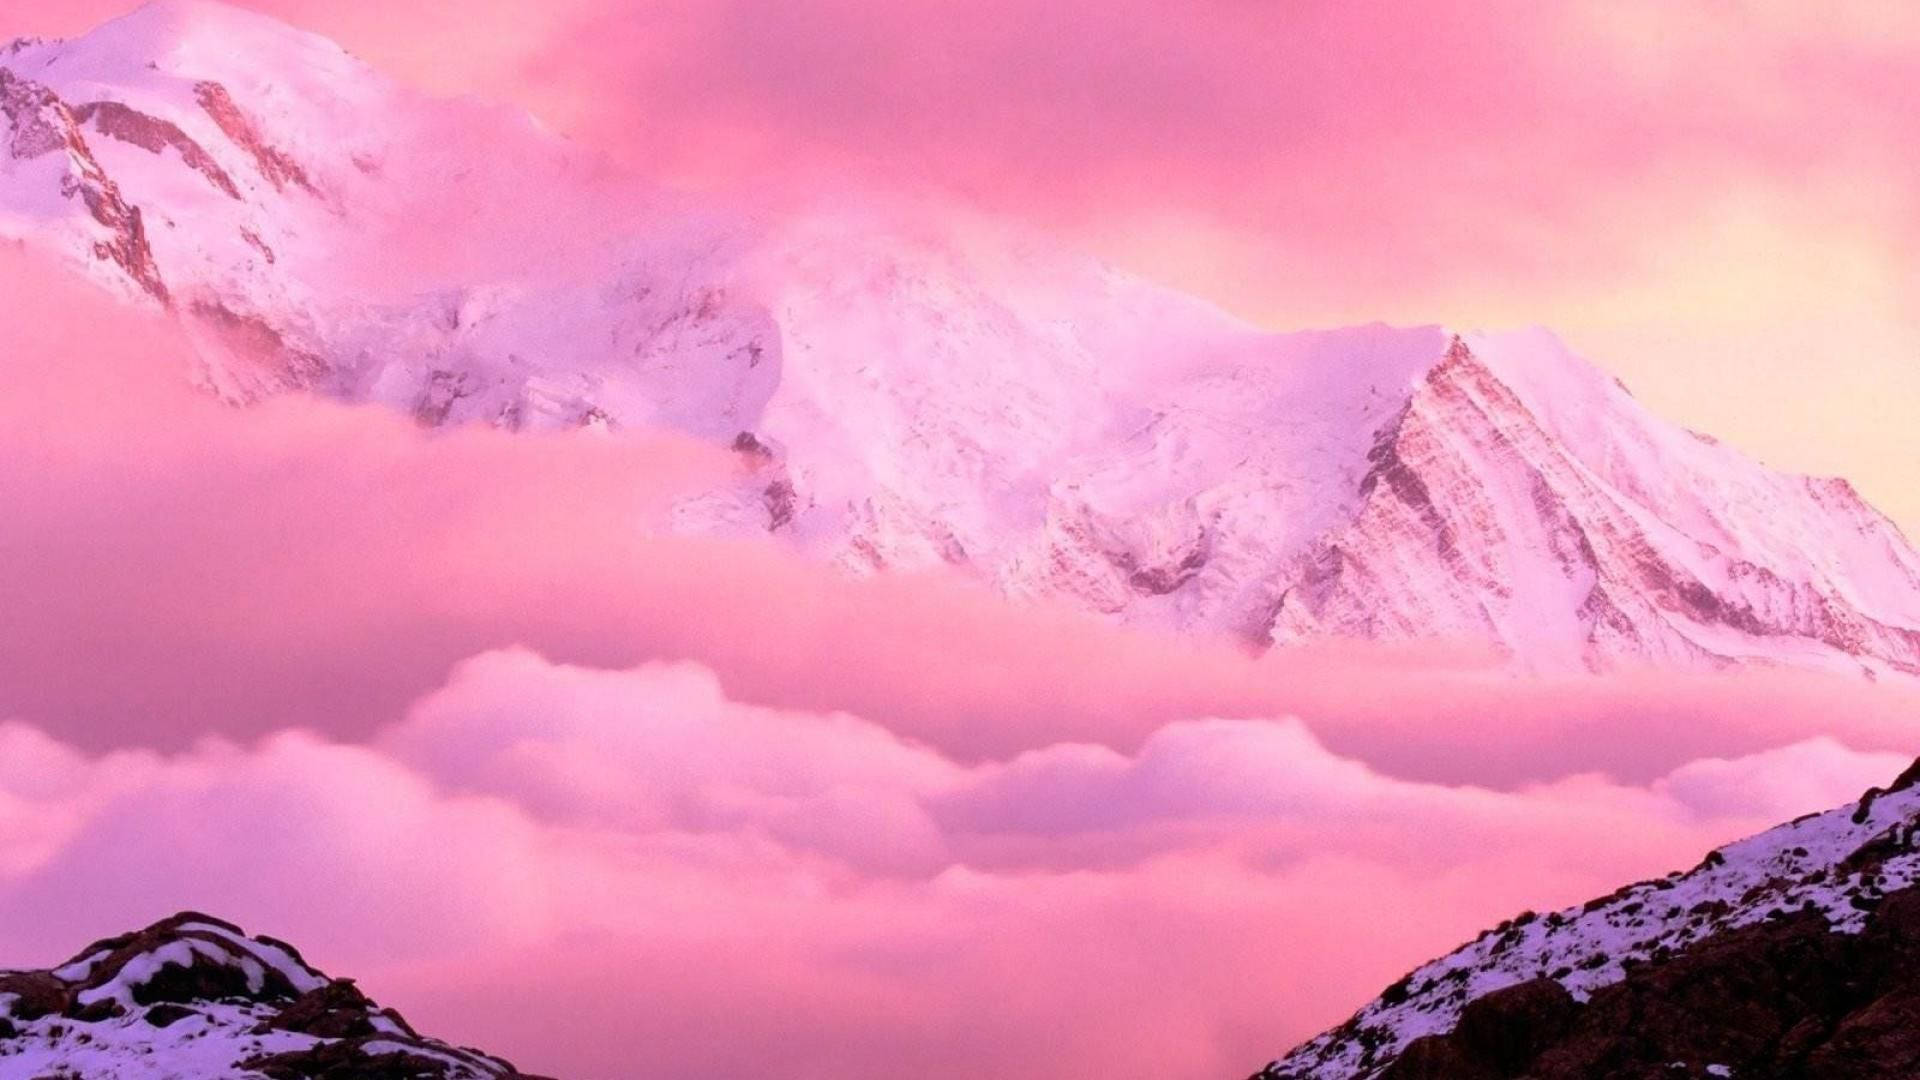 Aesthetic Pink Wallpaper Images